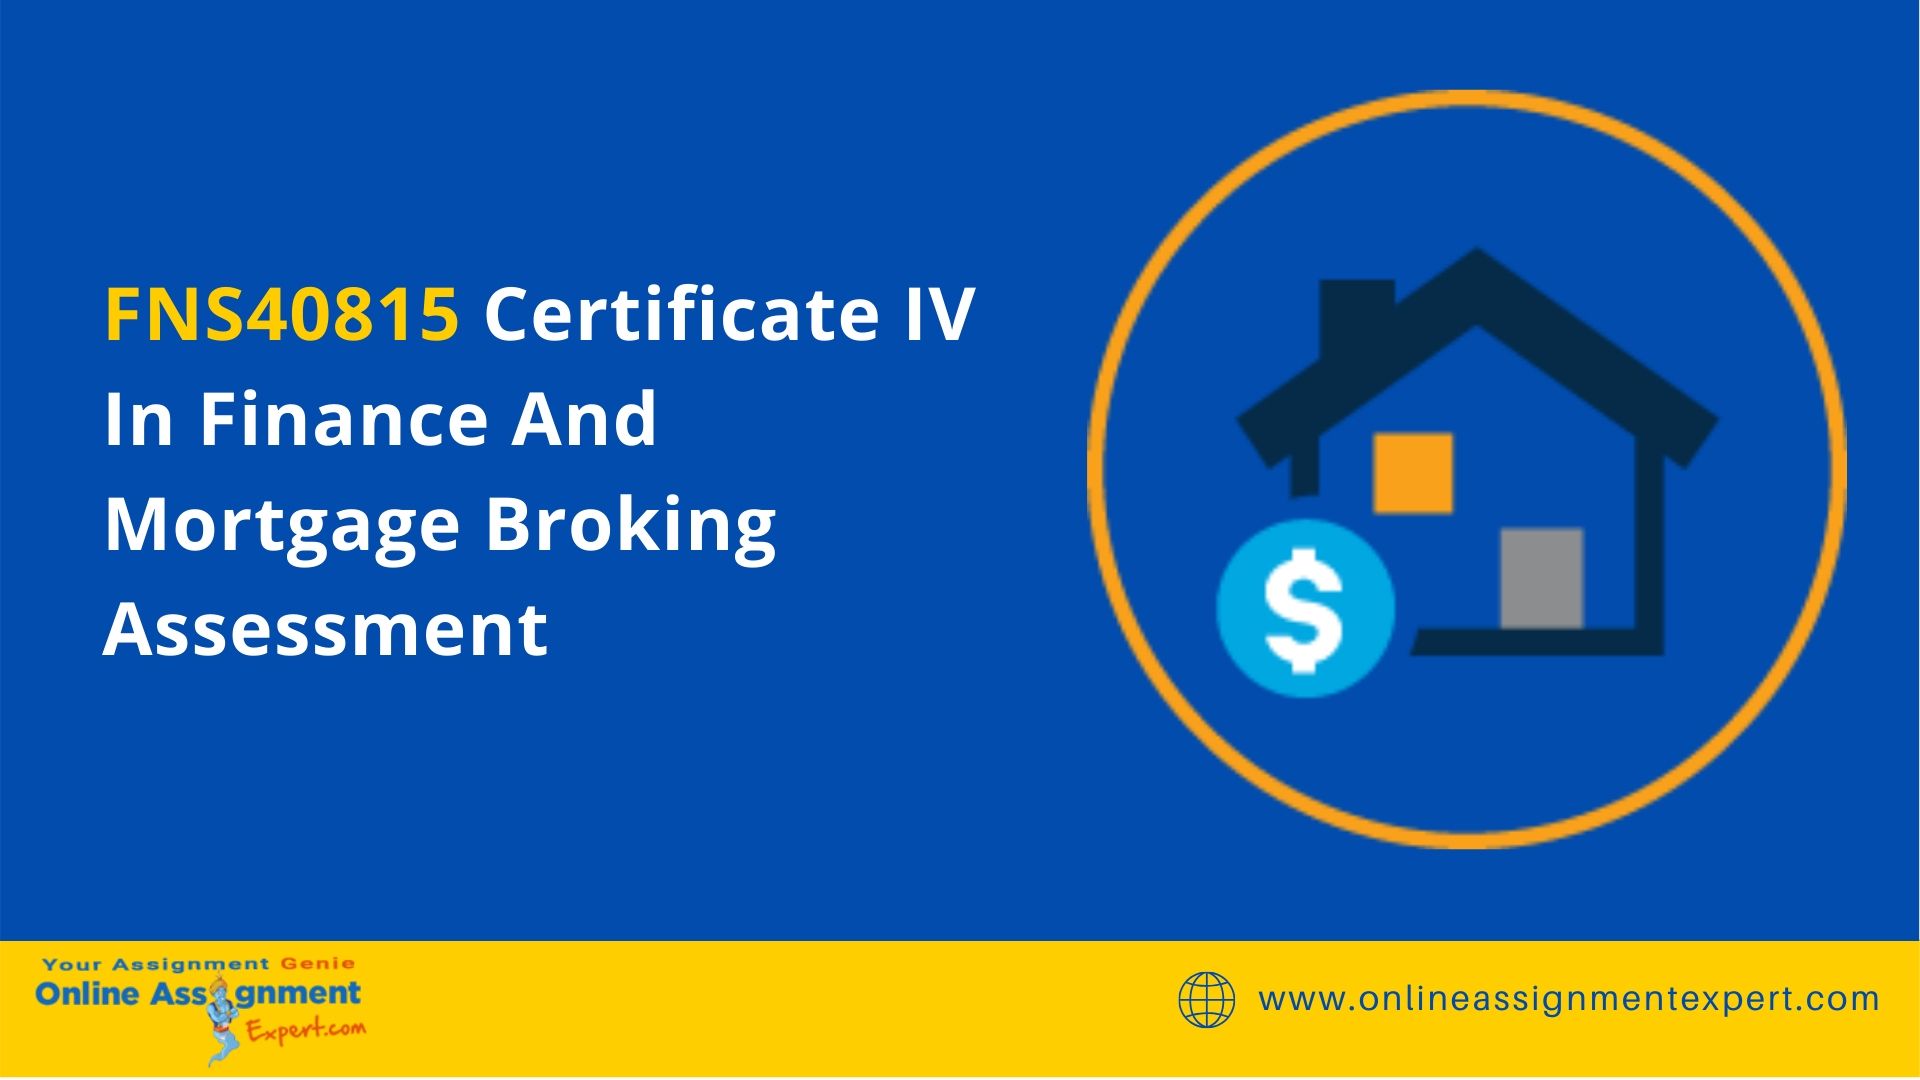 FNS40815 Certificate IV In Finance And Mortgage Broking Assessment